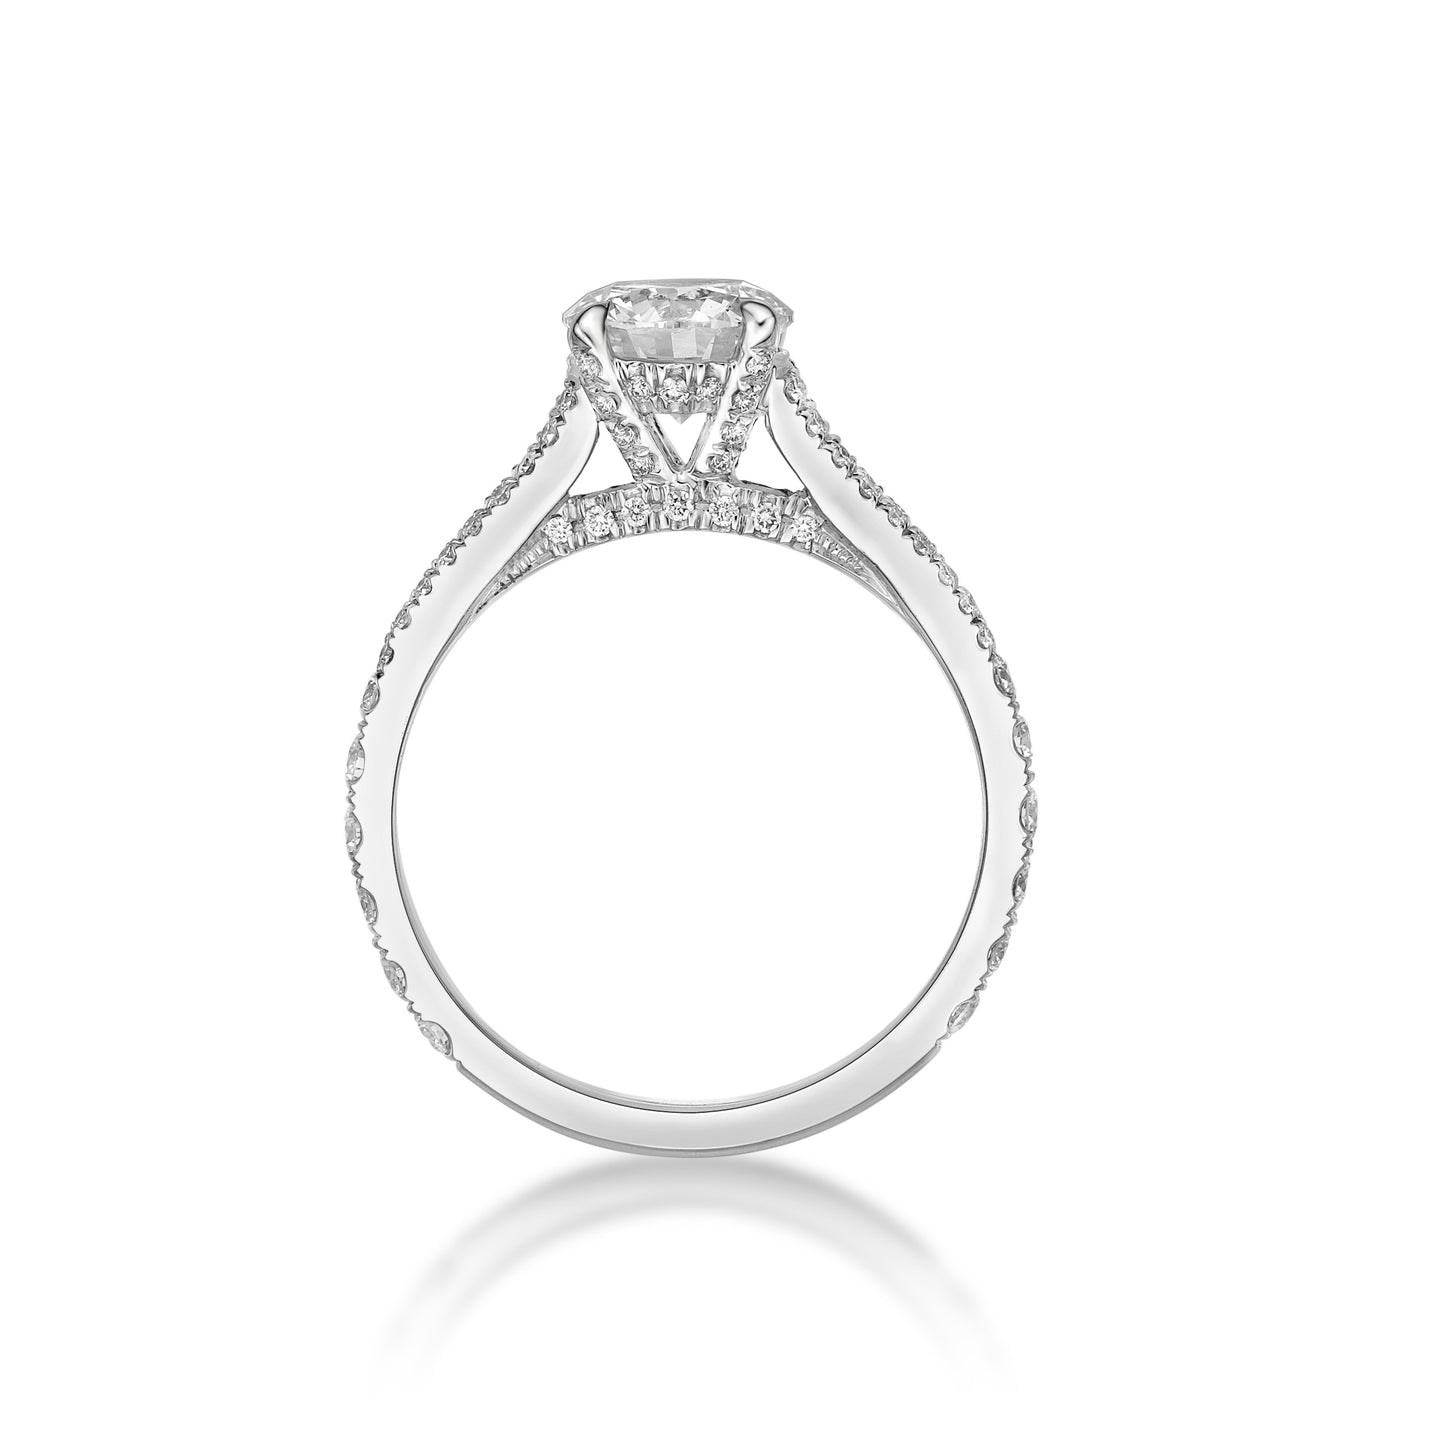 1.01ct Round Brilliant diamond in an 18K White Gold engagement ring setting with Split Shank Band4-claw setting with split-shank diamond eternity band